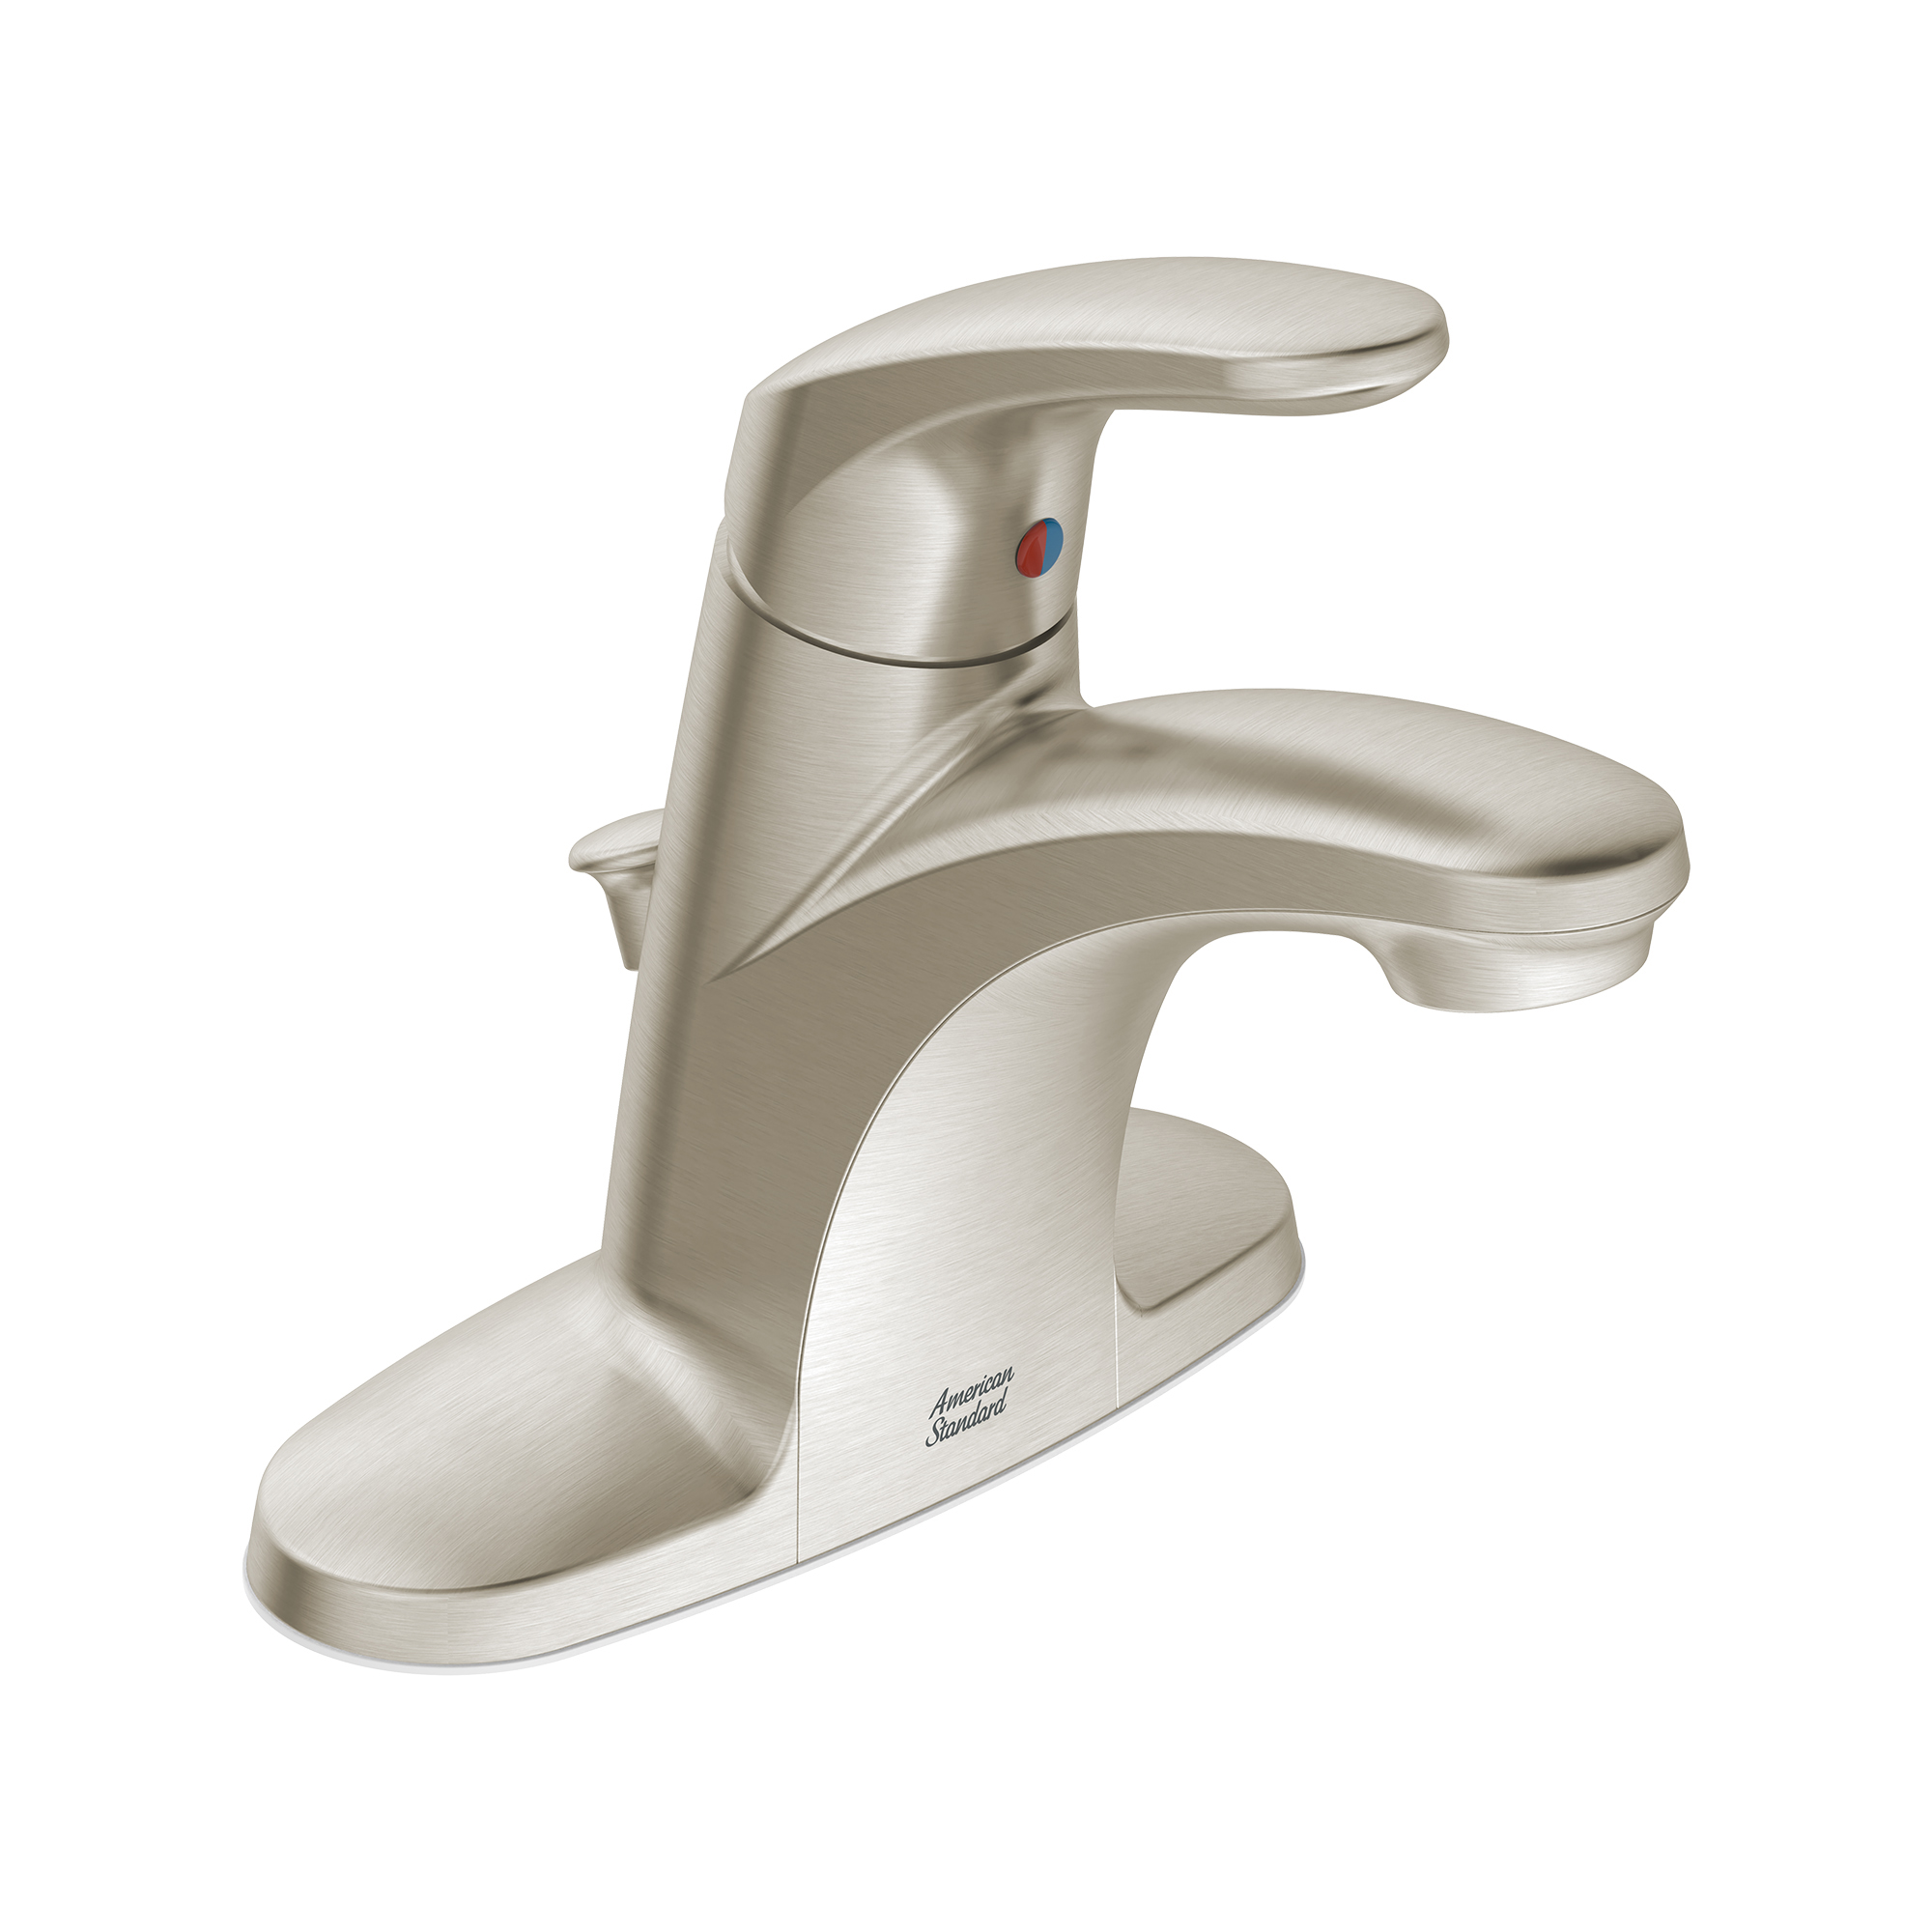 Colony® PRO 4-Inch Centerset Single-Handle Bathroom Faucet 1.2 gpm/4.5 L/min With Lever Handle